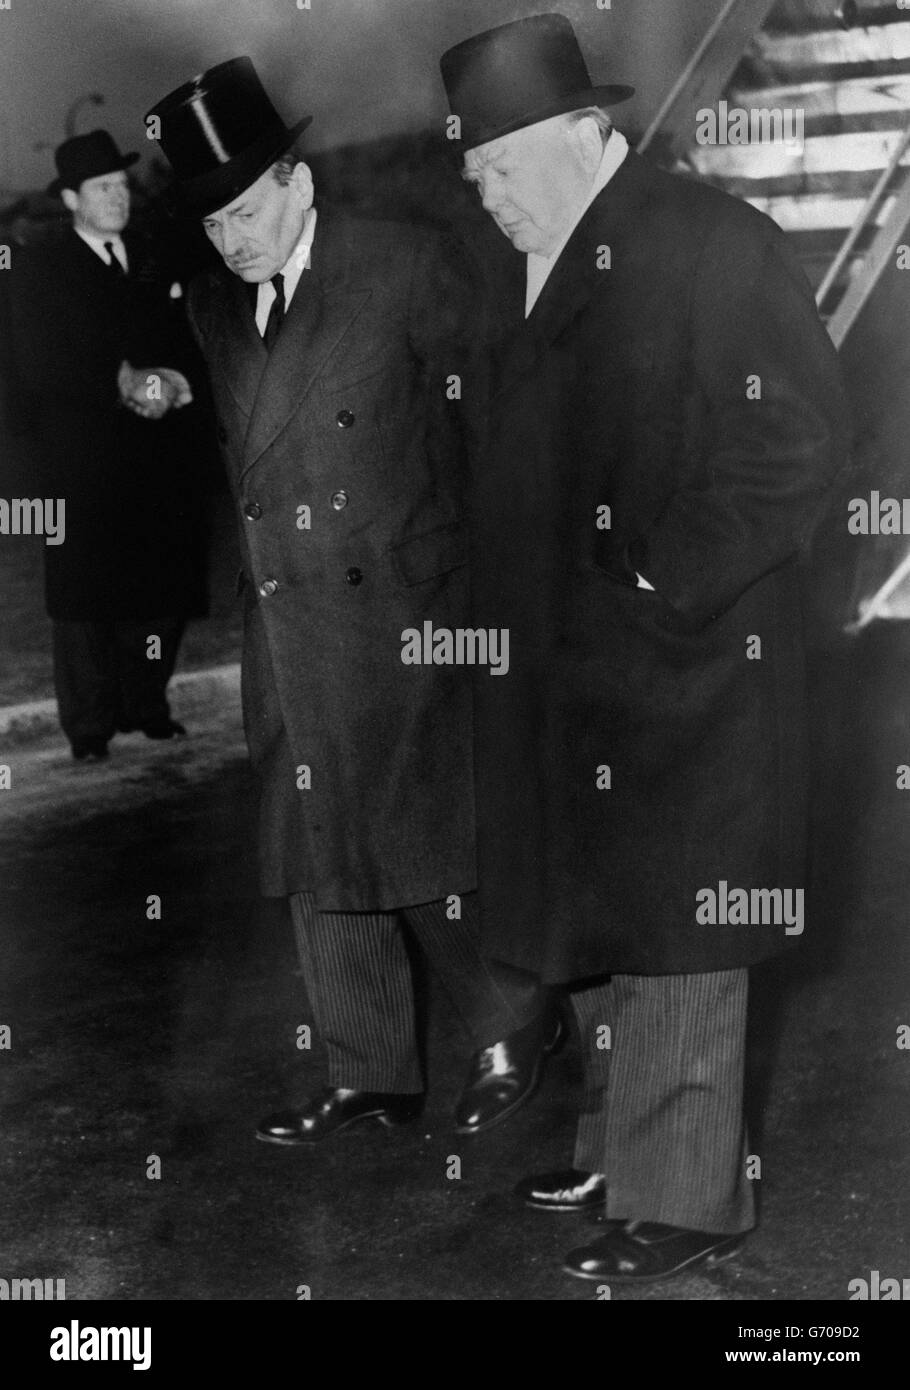 Opponents in politics but united in grief at the loss of their sovereign, King George VI, are Opposition leader Clement Attlee (l) and Prime Minister Winston Churchill at London airport as they waited to greet the new Queen Elizabeth. The Queen and her husband, the Duke of Edinburgh, were about to arrive from Kenya, where their Commonwealth tour was cut short by the death of the King. Stock Photo